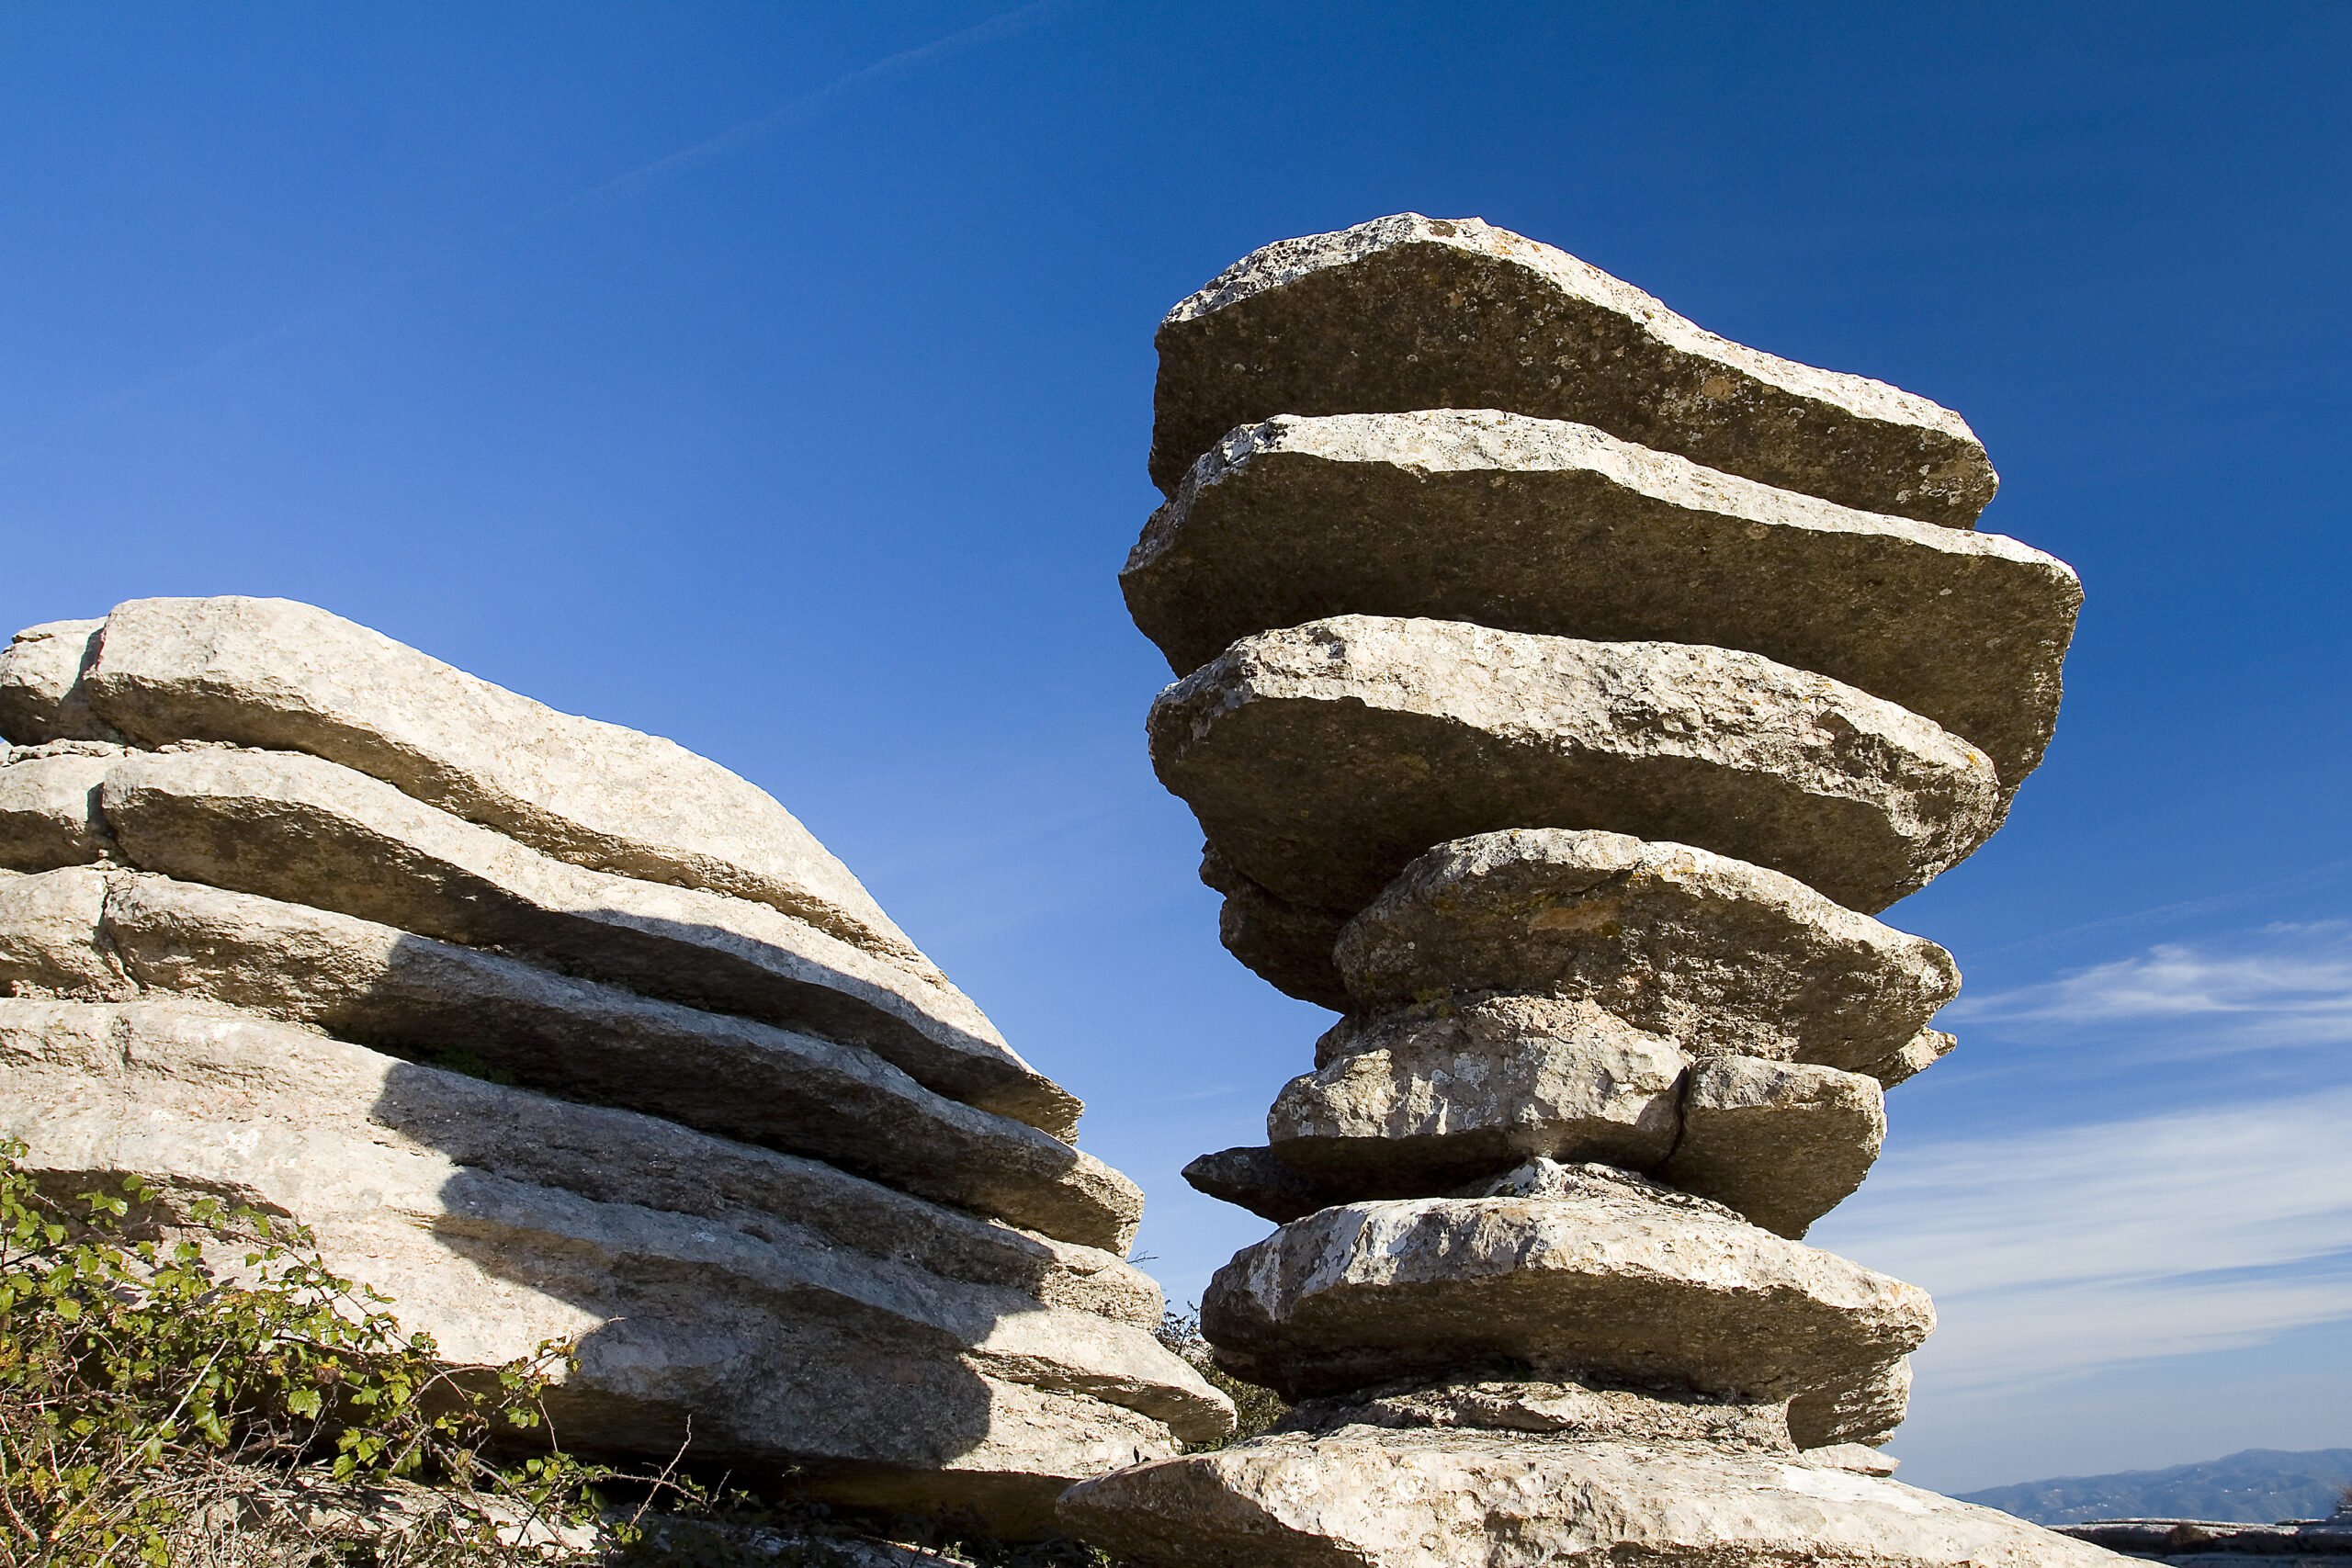 Explore The Famous Stone Formations On The Torcal De Antequera & Dolmenes Tour From Granada